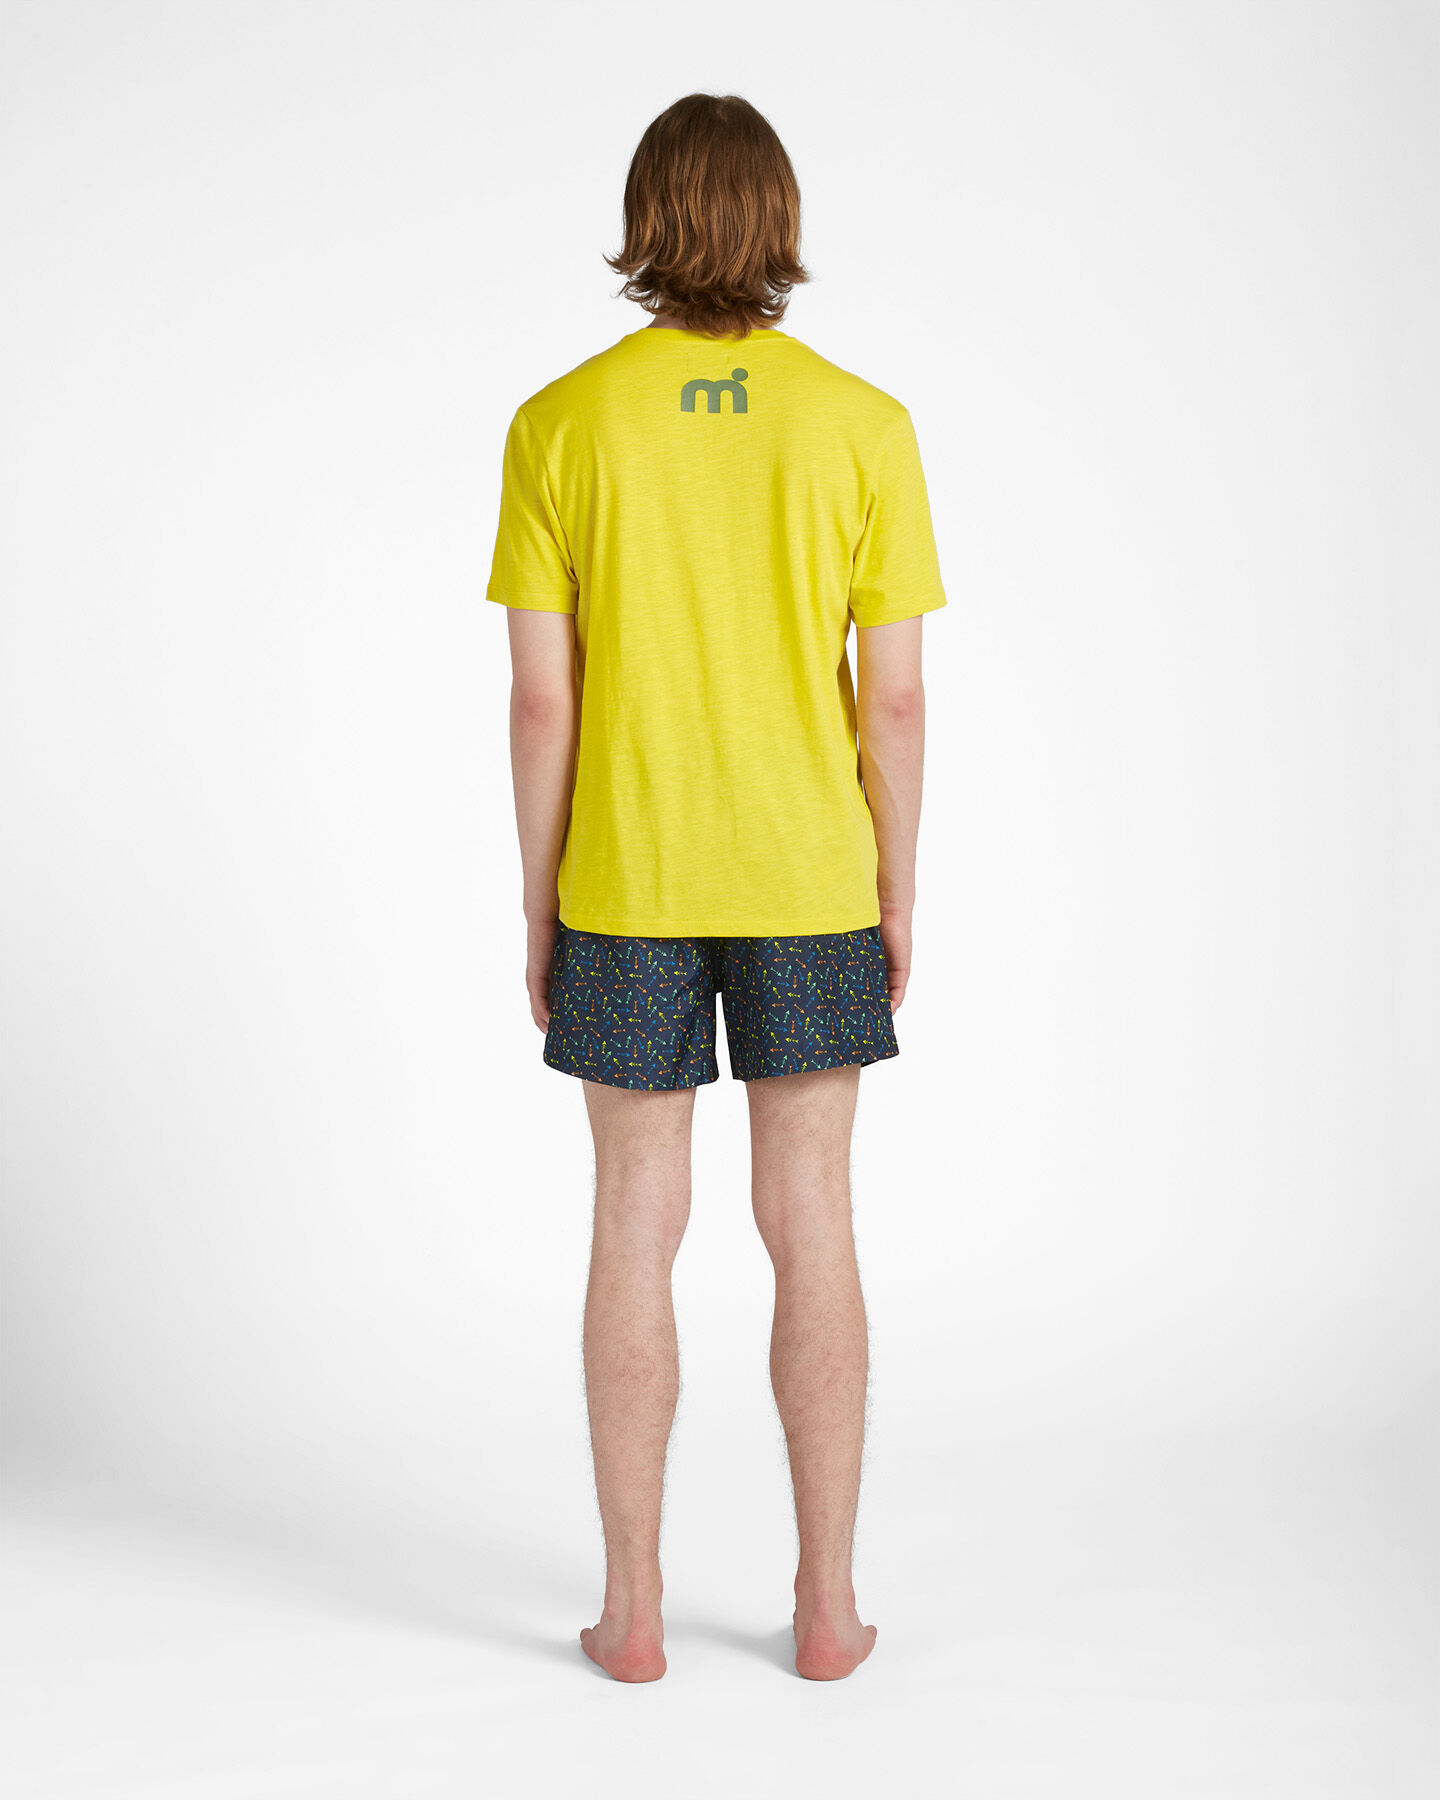  T-Shirt MISTRAL SURF 1976 M S4102910|699|S scatto 2